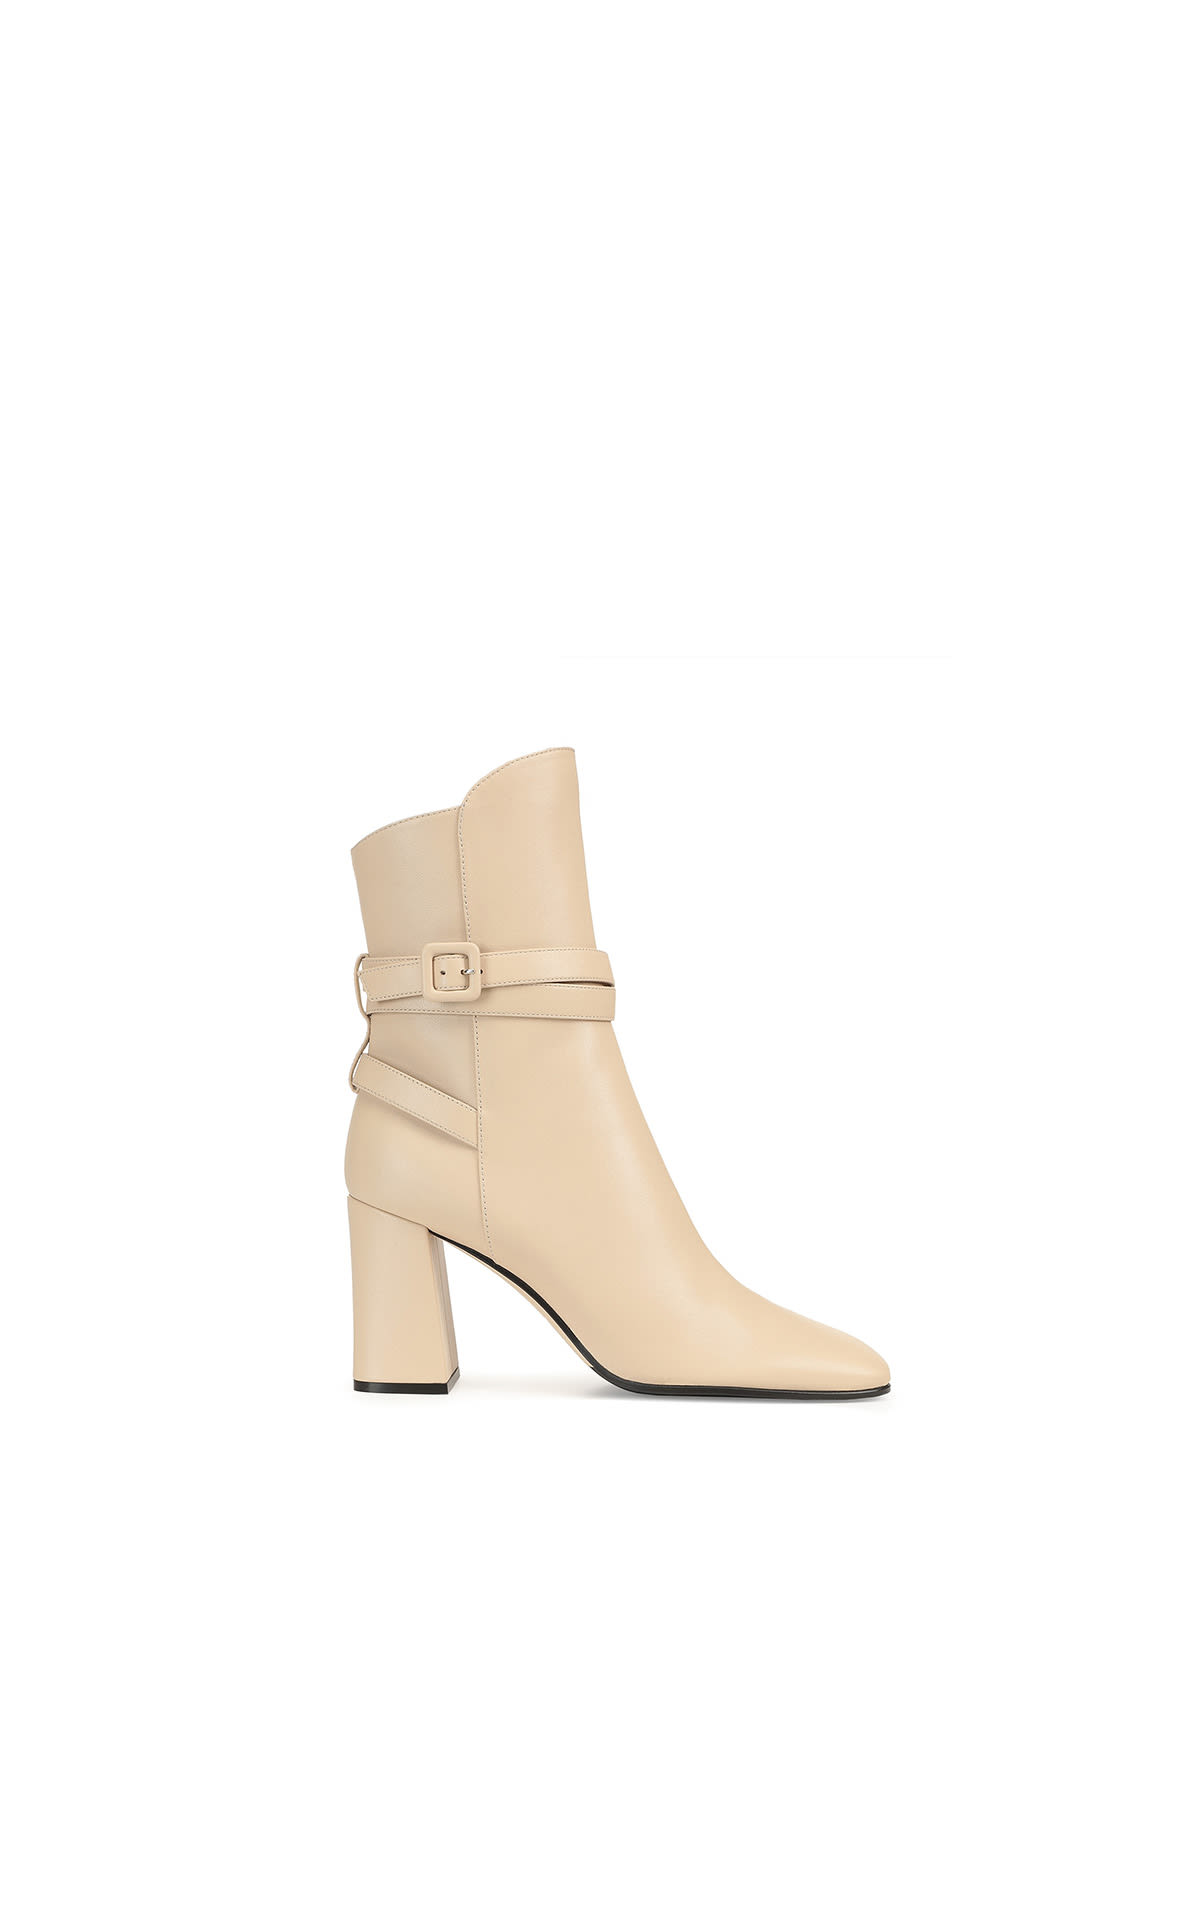 Ankle boots in cream leather with buckle